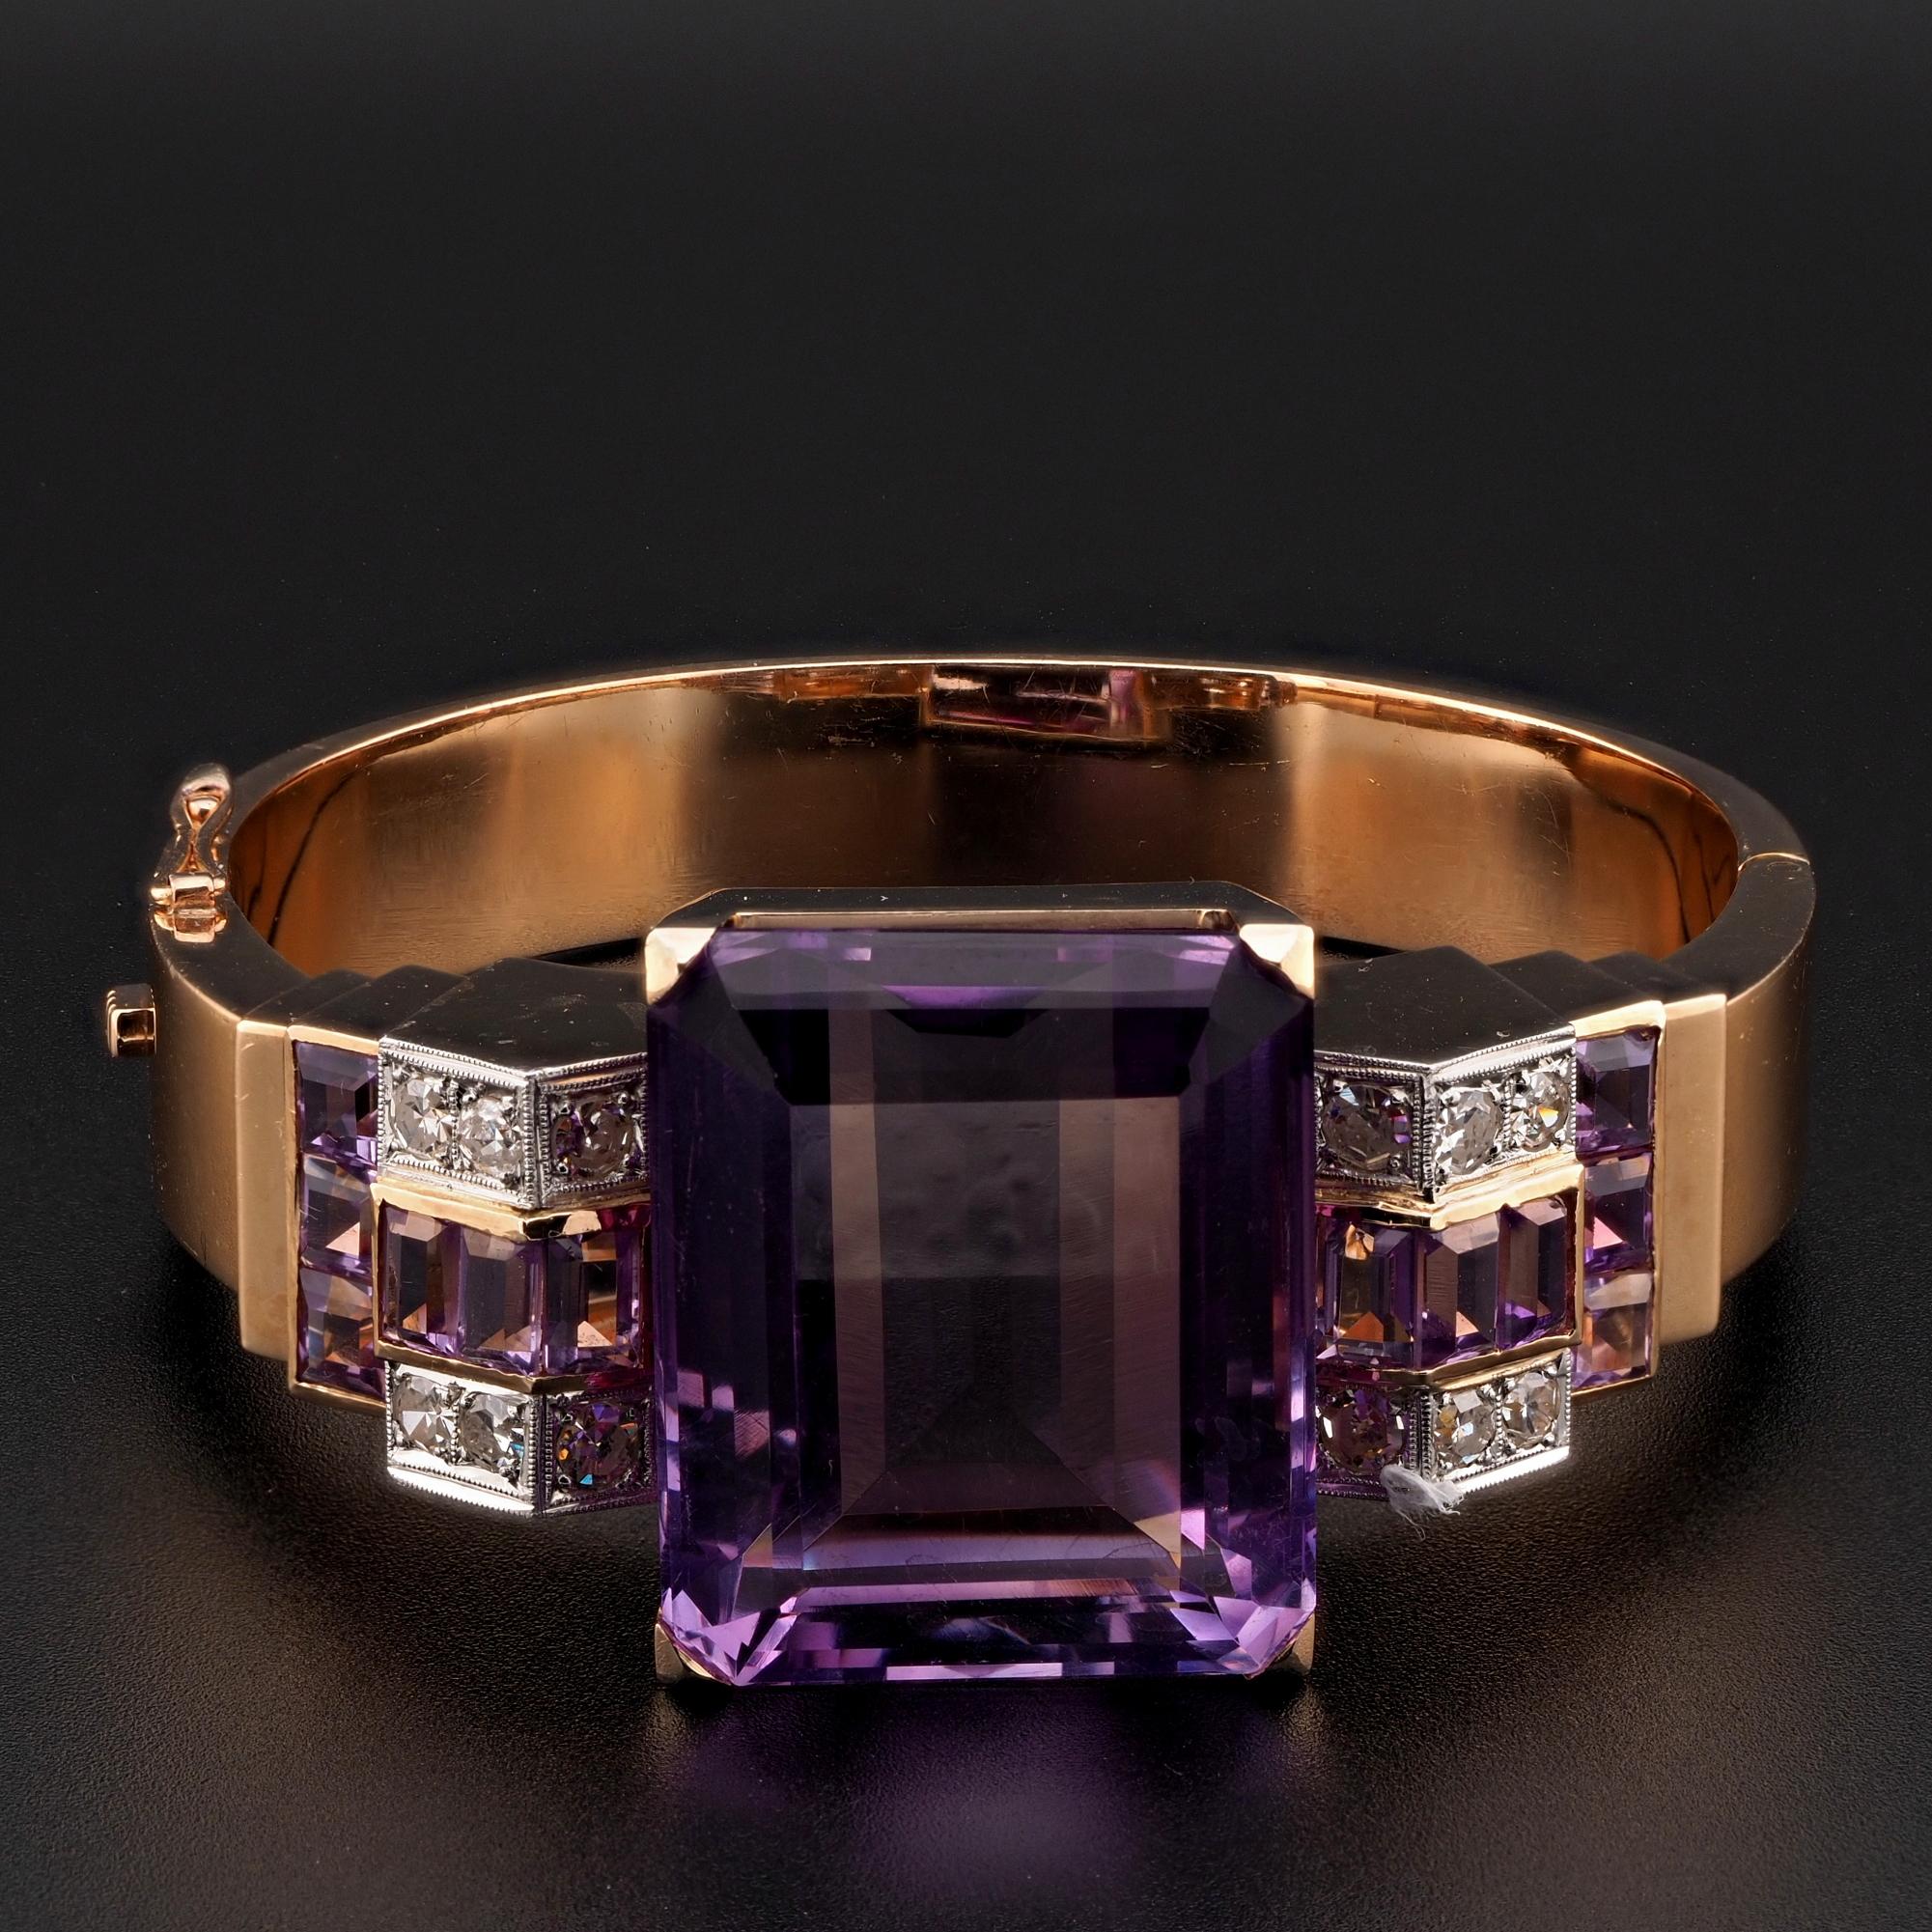 Statement Bangle
This absolutely stunning antique bangle is 1930/35 ca.
Hand crafted as unique, no other one like this one, done of solid 18 KT gold quite rosè colour and Platinum
It is beautifully designed in a strong Deco character upon the centre